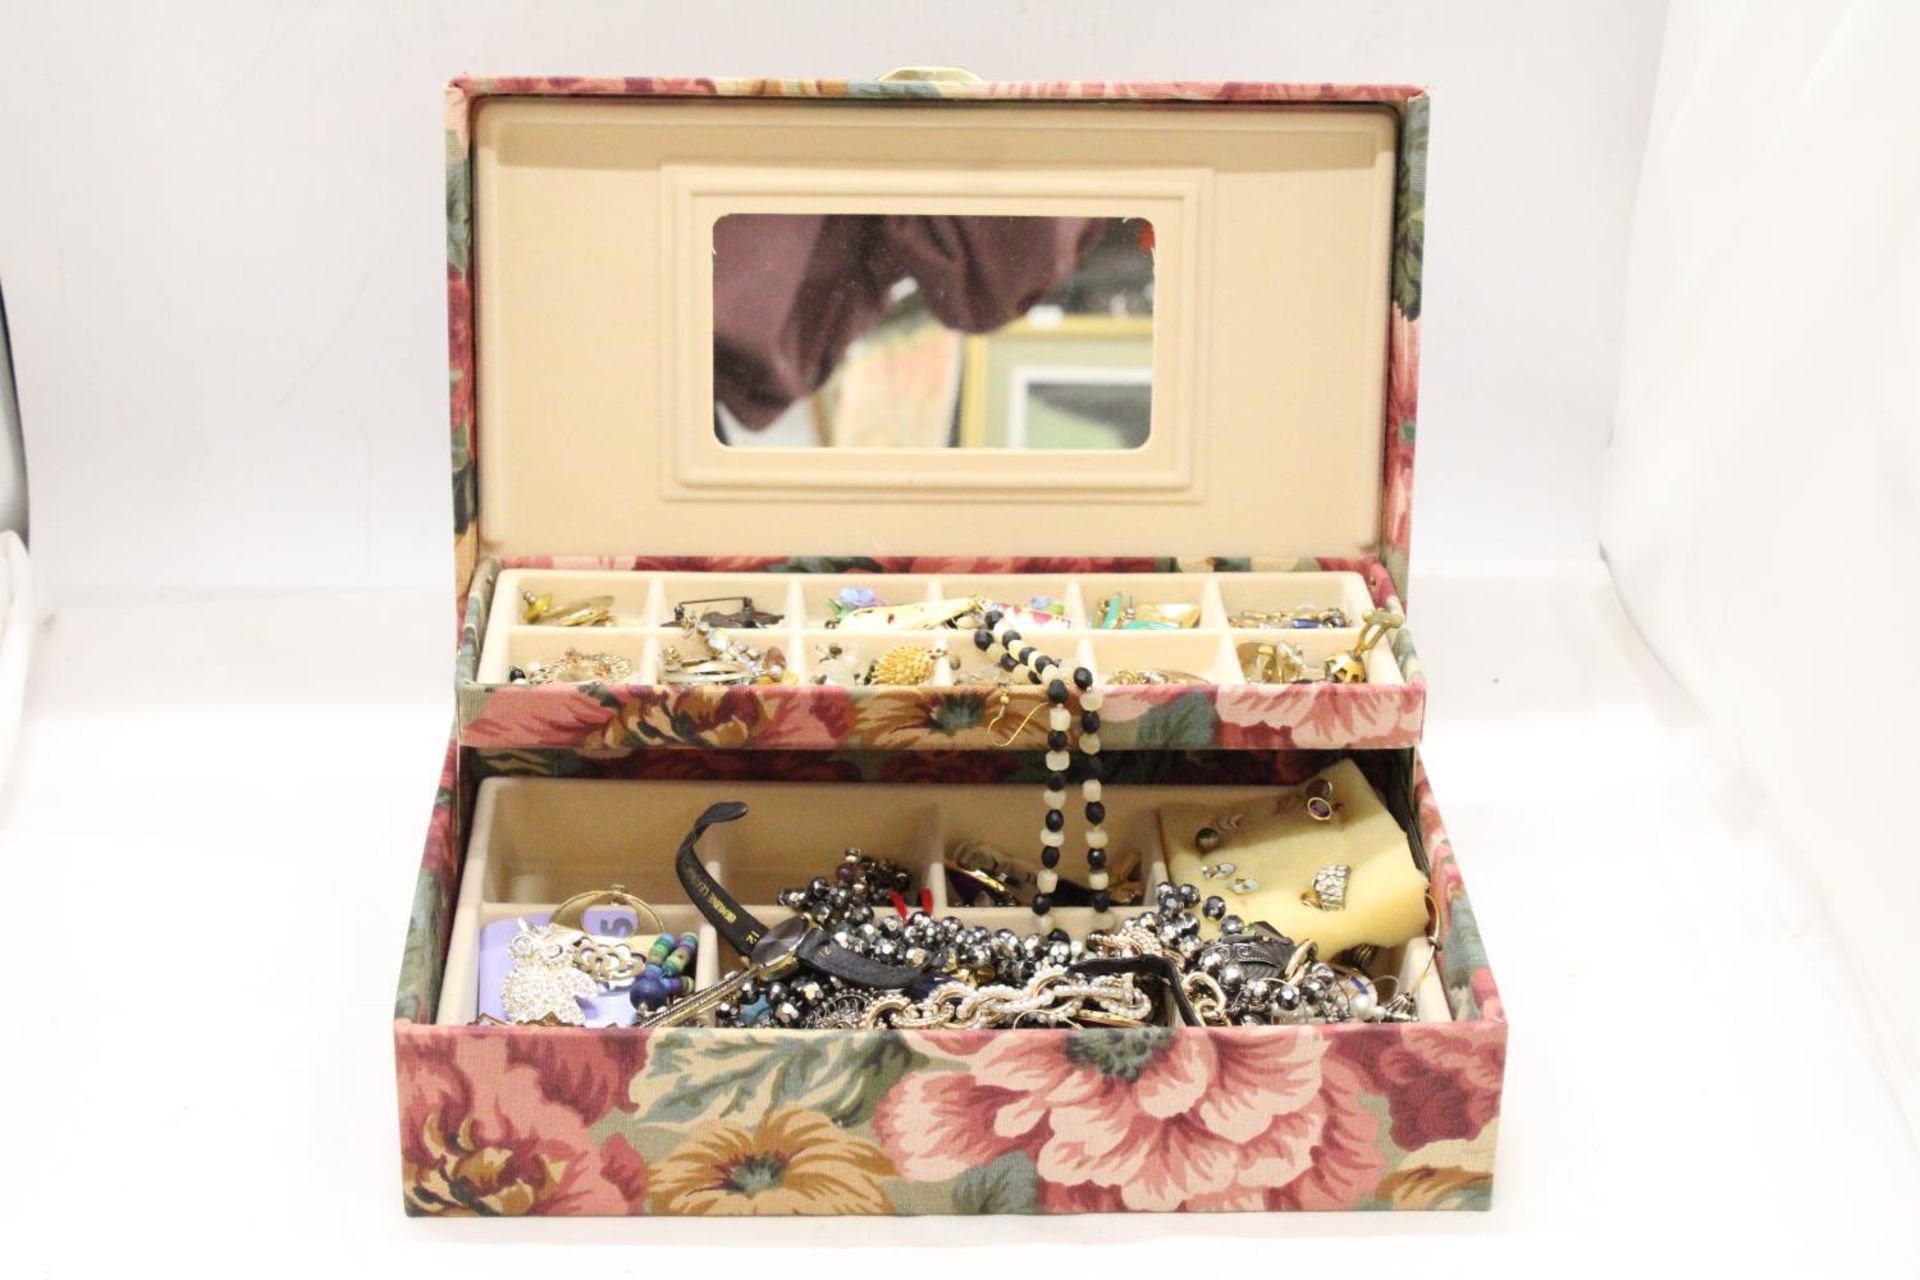 A VINTAGE JEWELLERY BOX CONTAINING VARIOUS COSTUME JEWELLERY INCLUDING EARRINGS, BROOCHS,